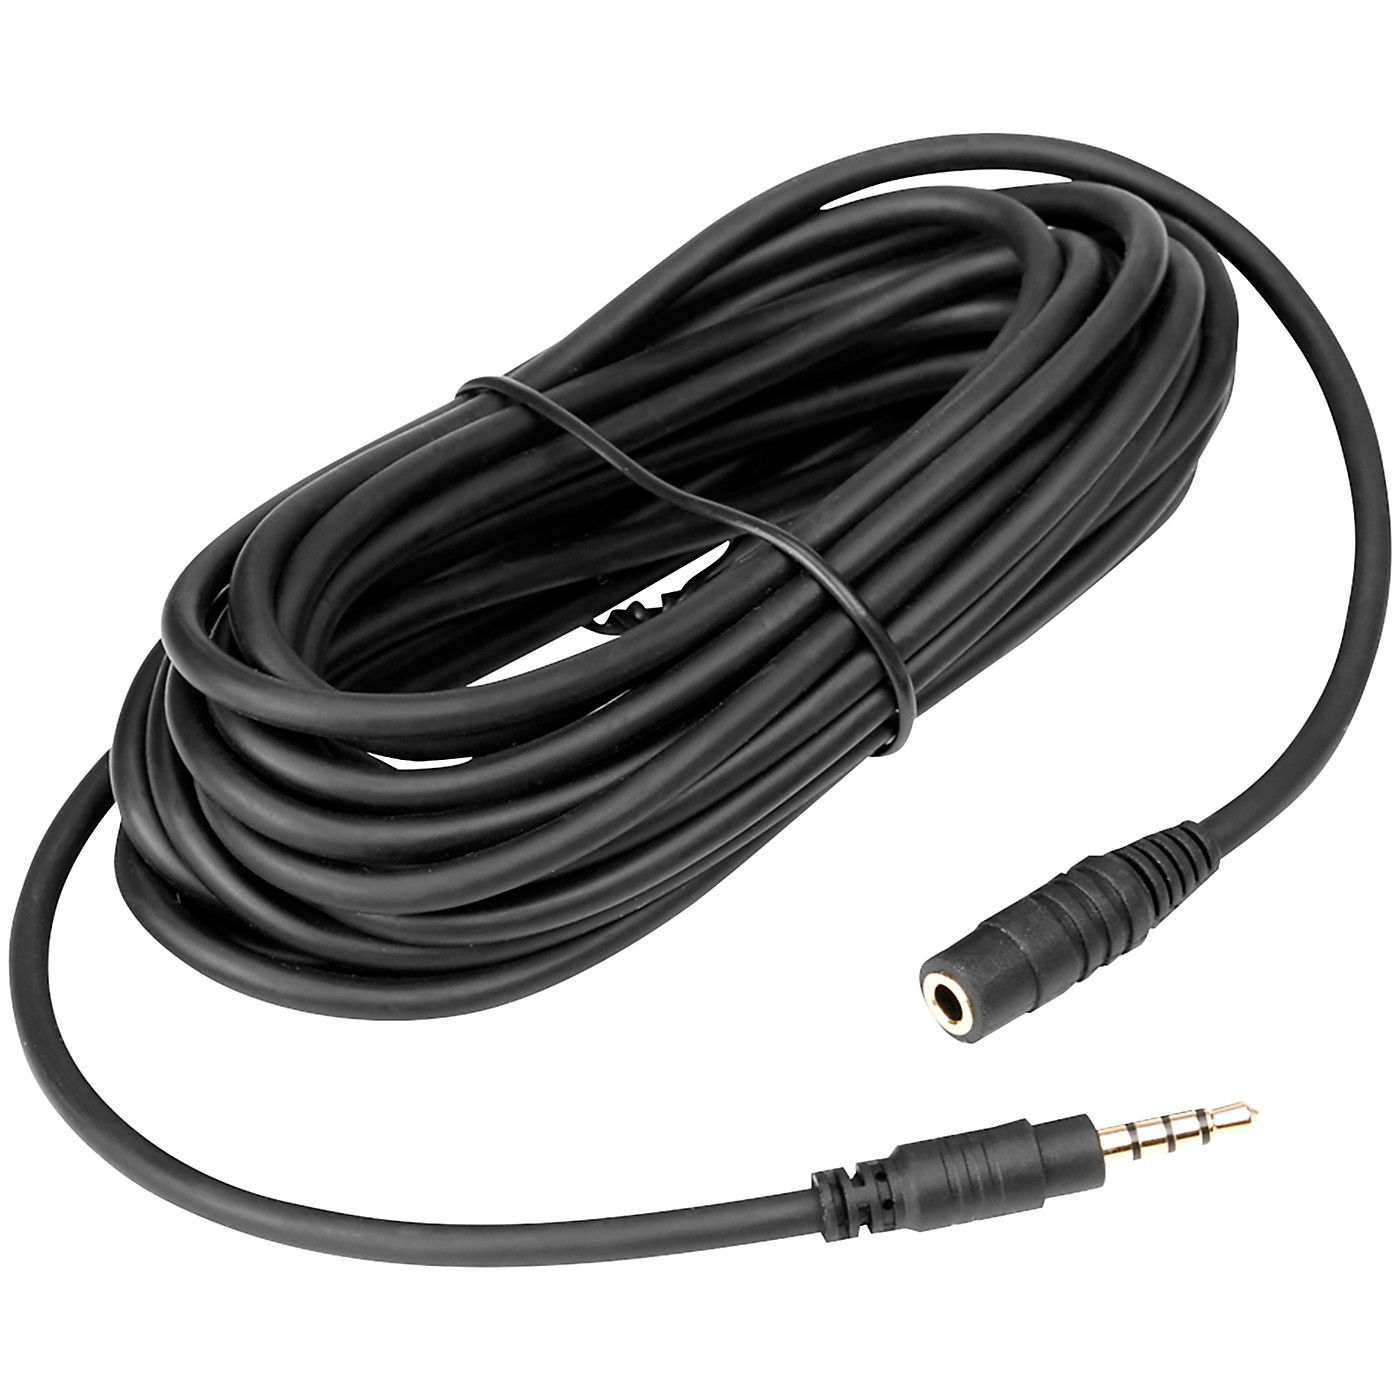 Saramonic SR-SC5500 16.4 ft. Audio Extension Cable with 3.5mm TRRS Female to Male Connectors thumbnail